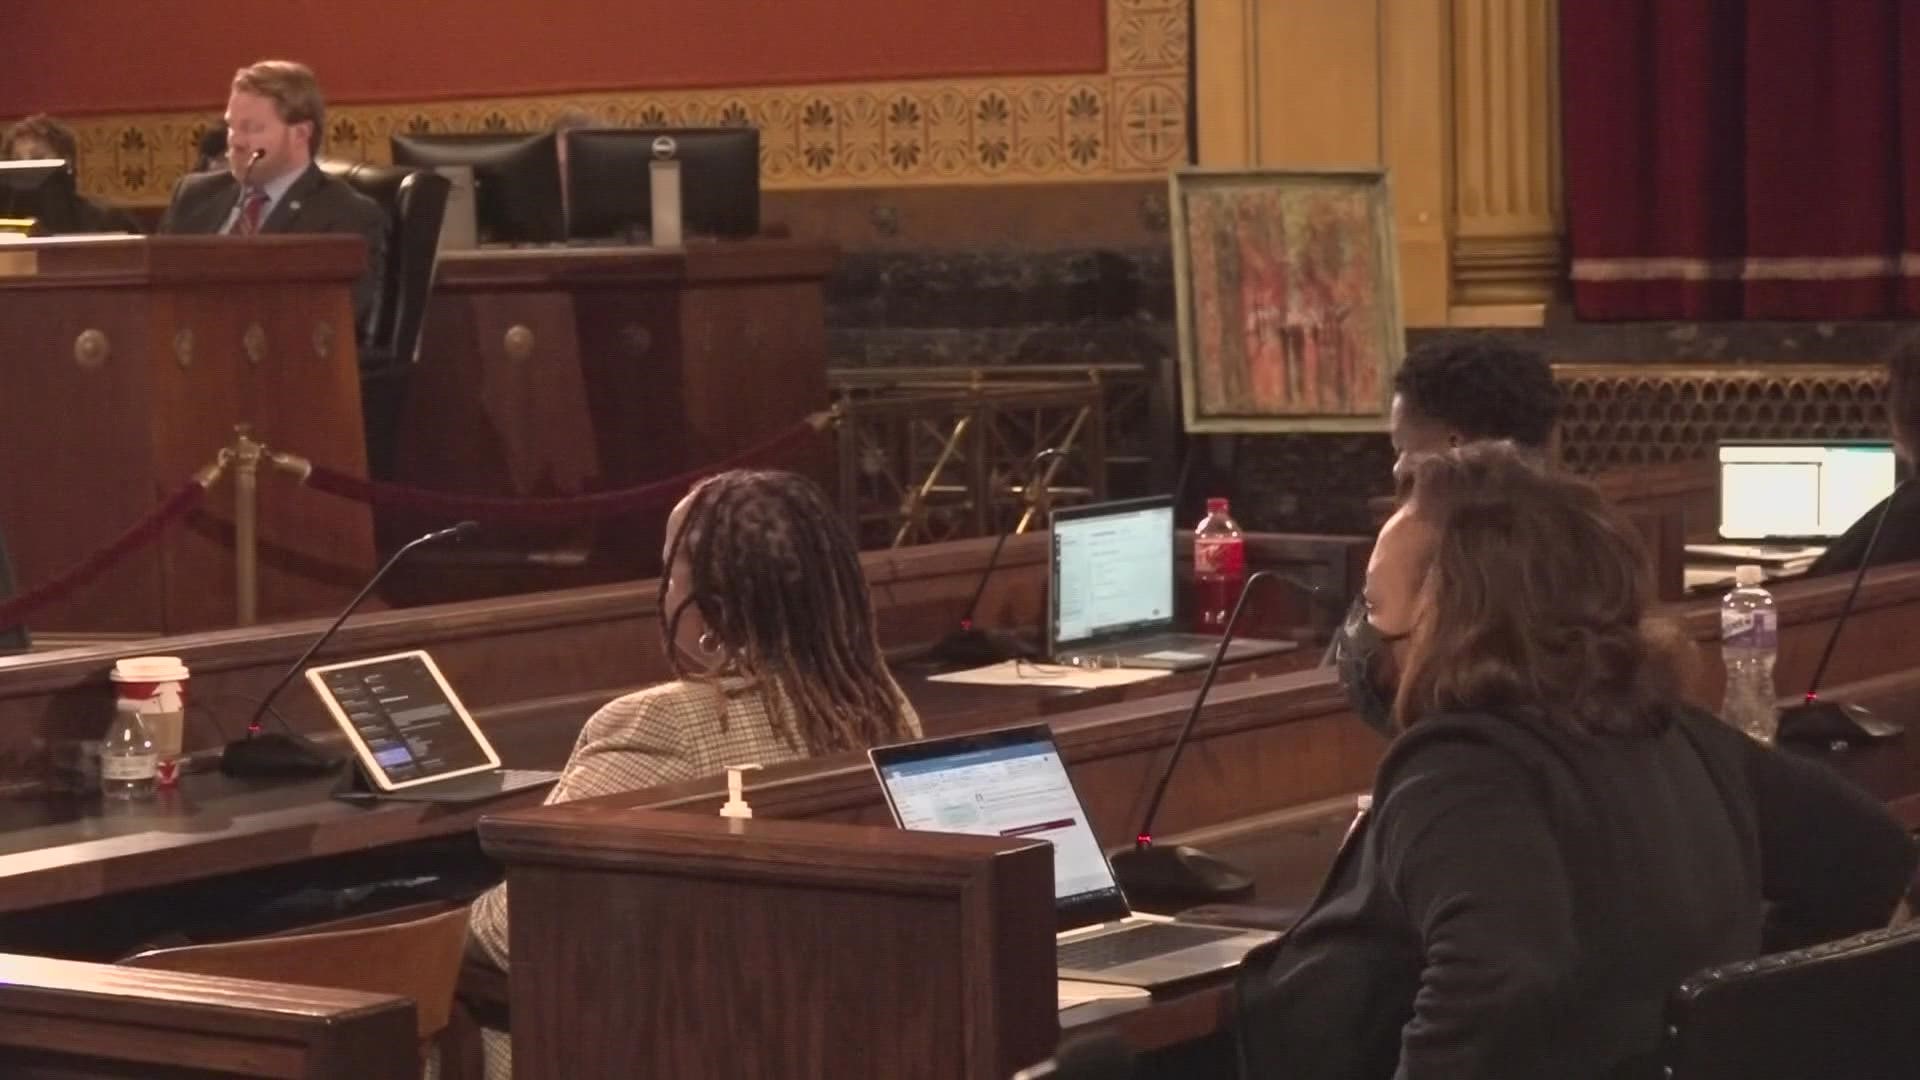 City council also voted to not renew liquor licenses for 12 bars and businesses.